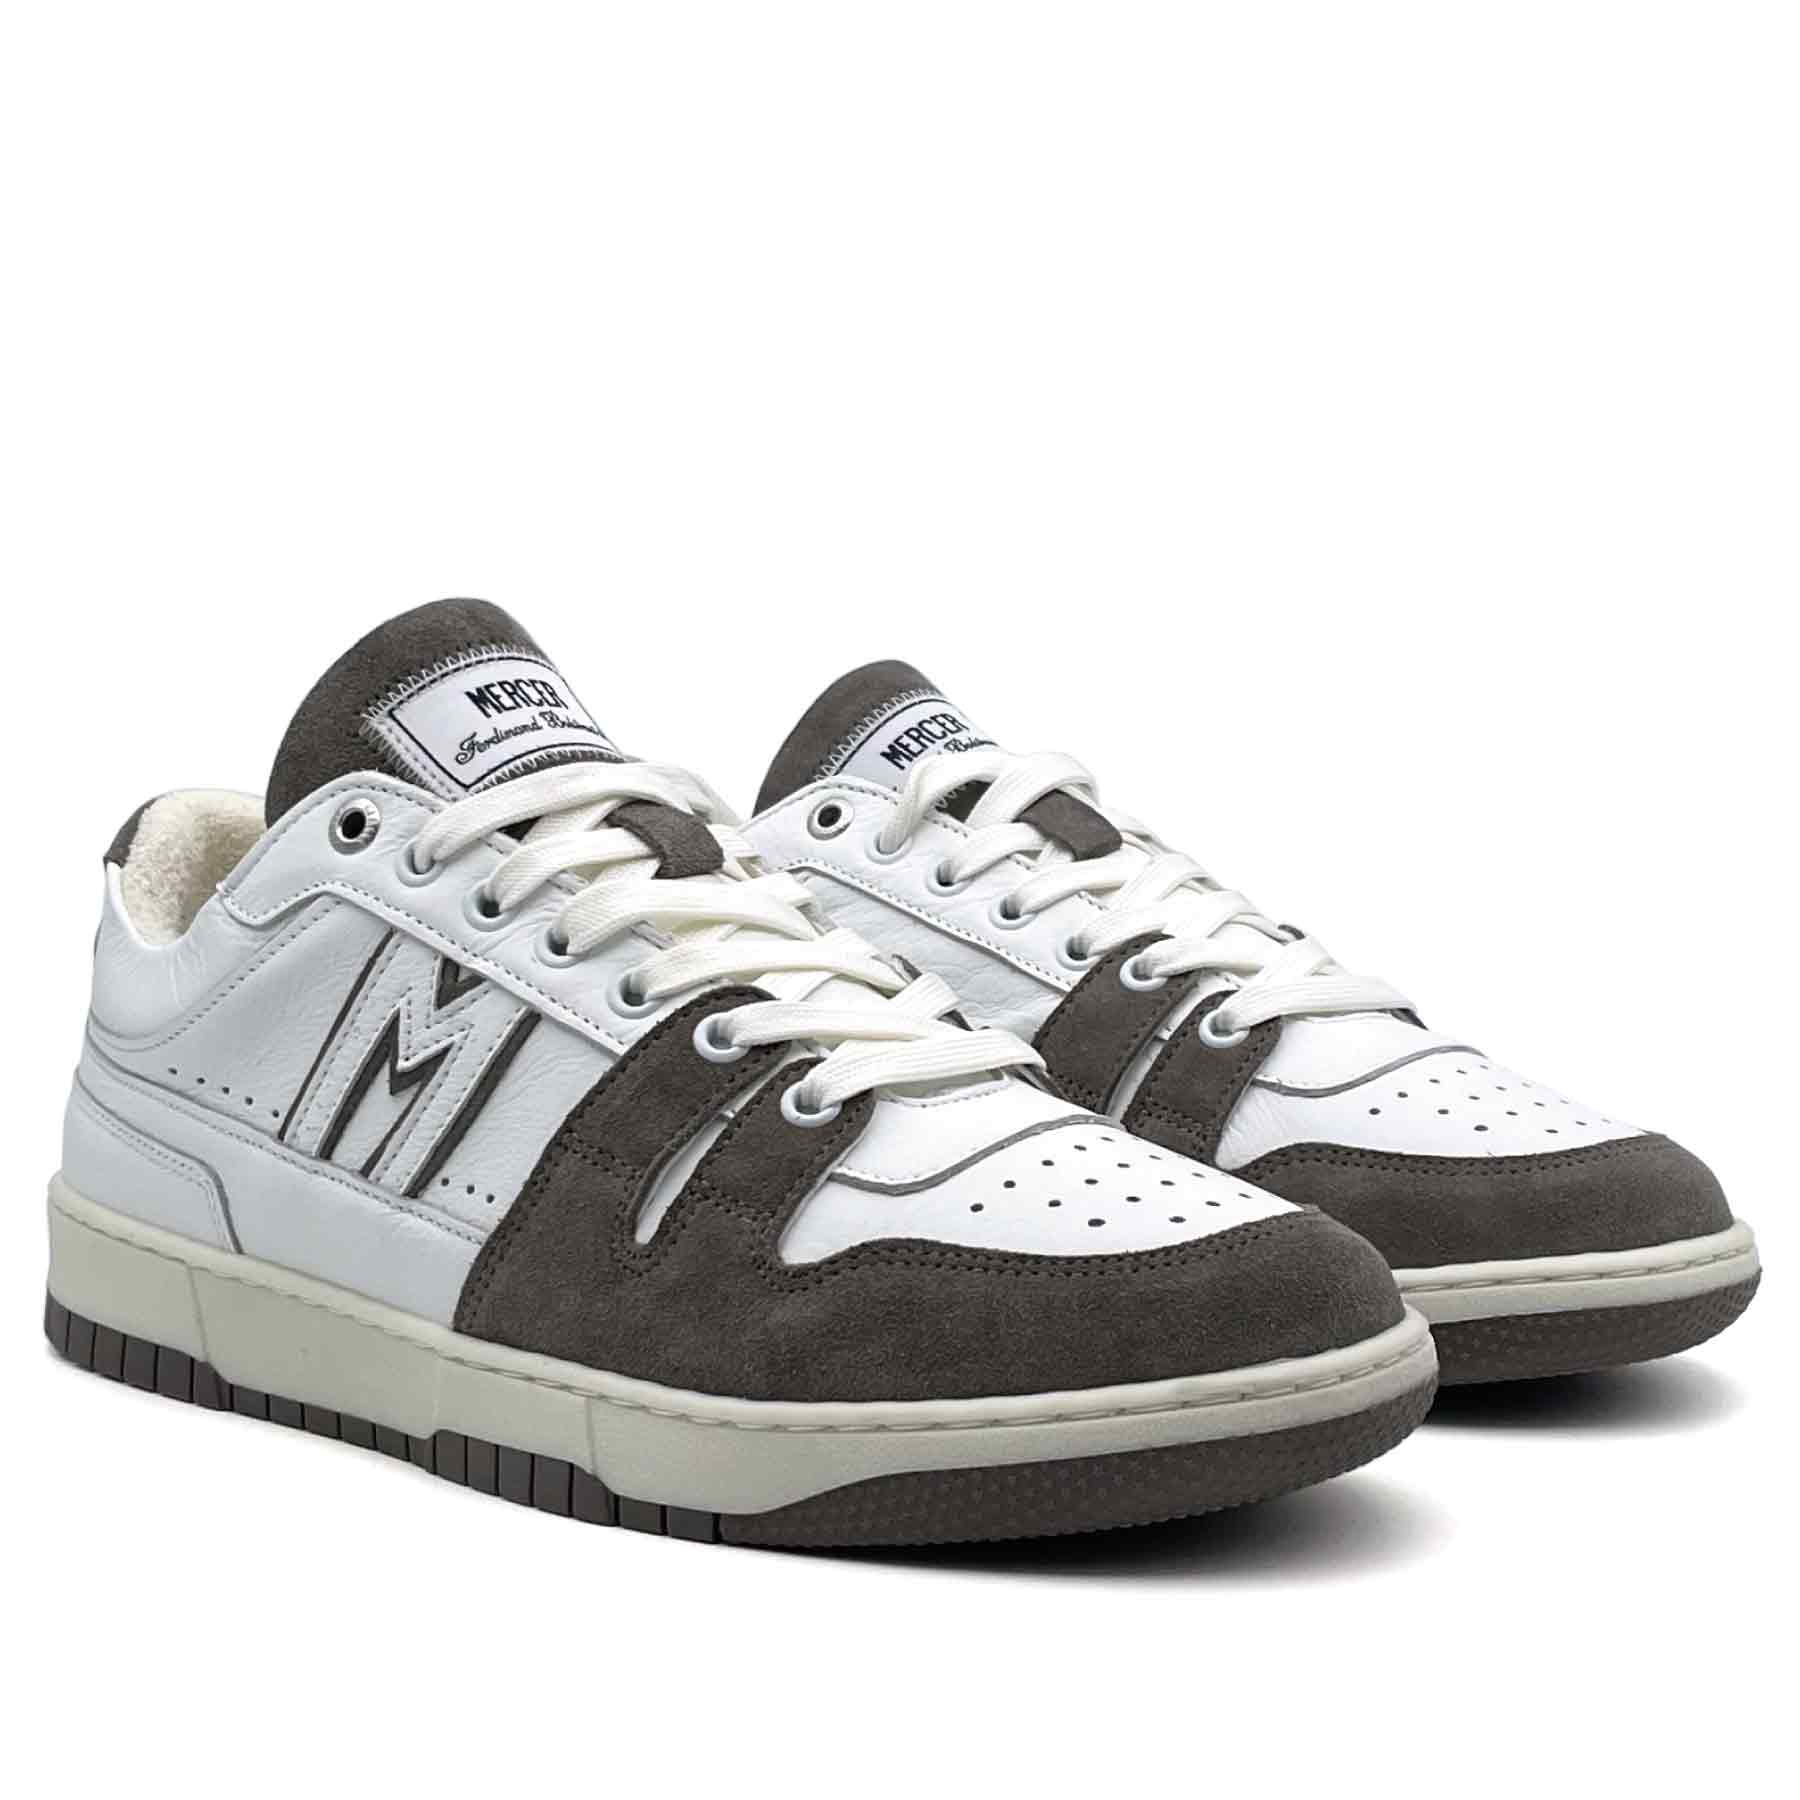 The Brooklyn Vintage White / Taupe